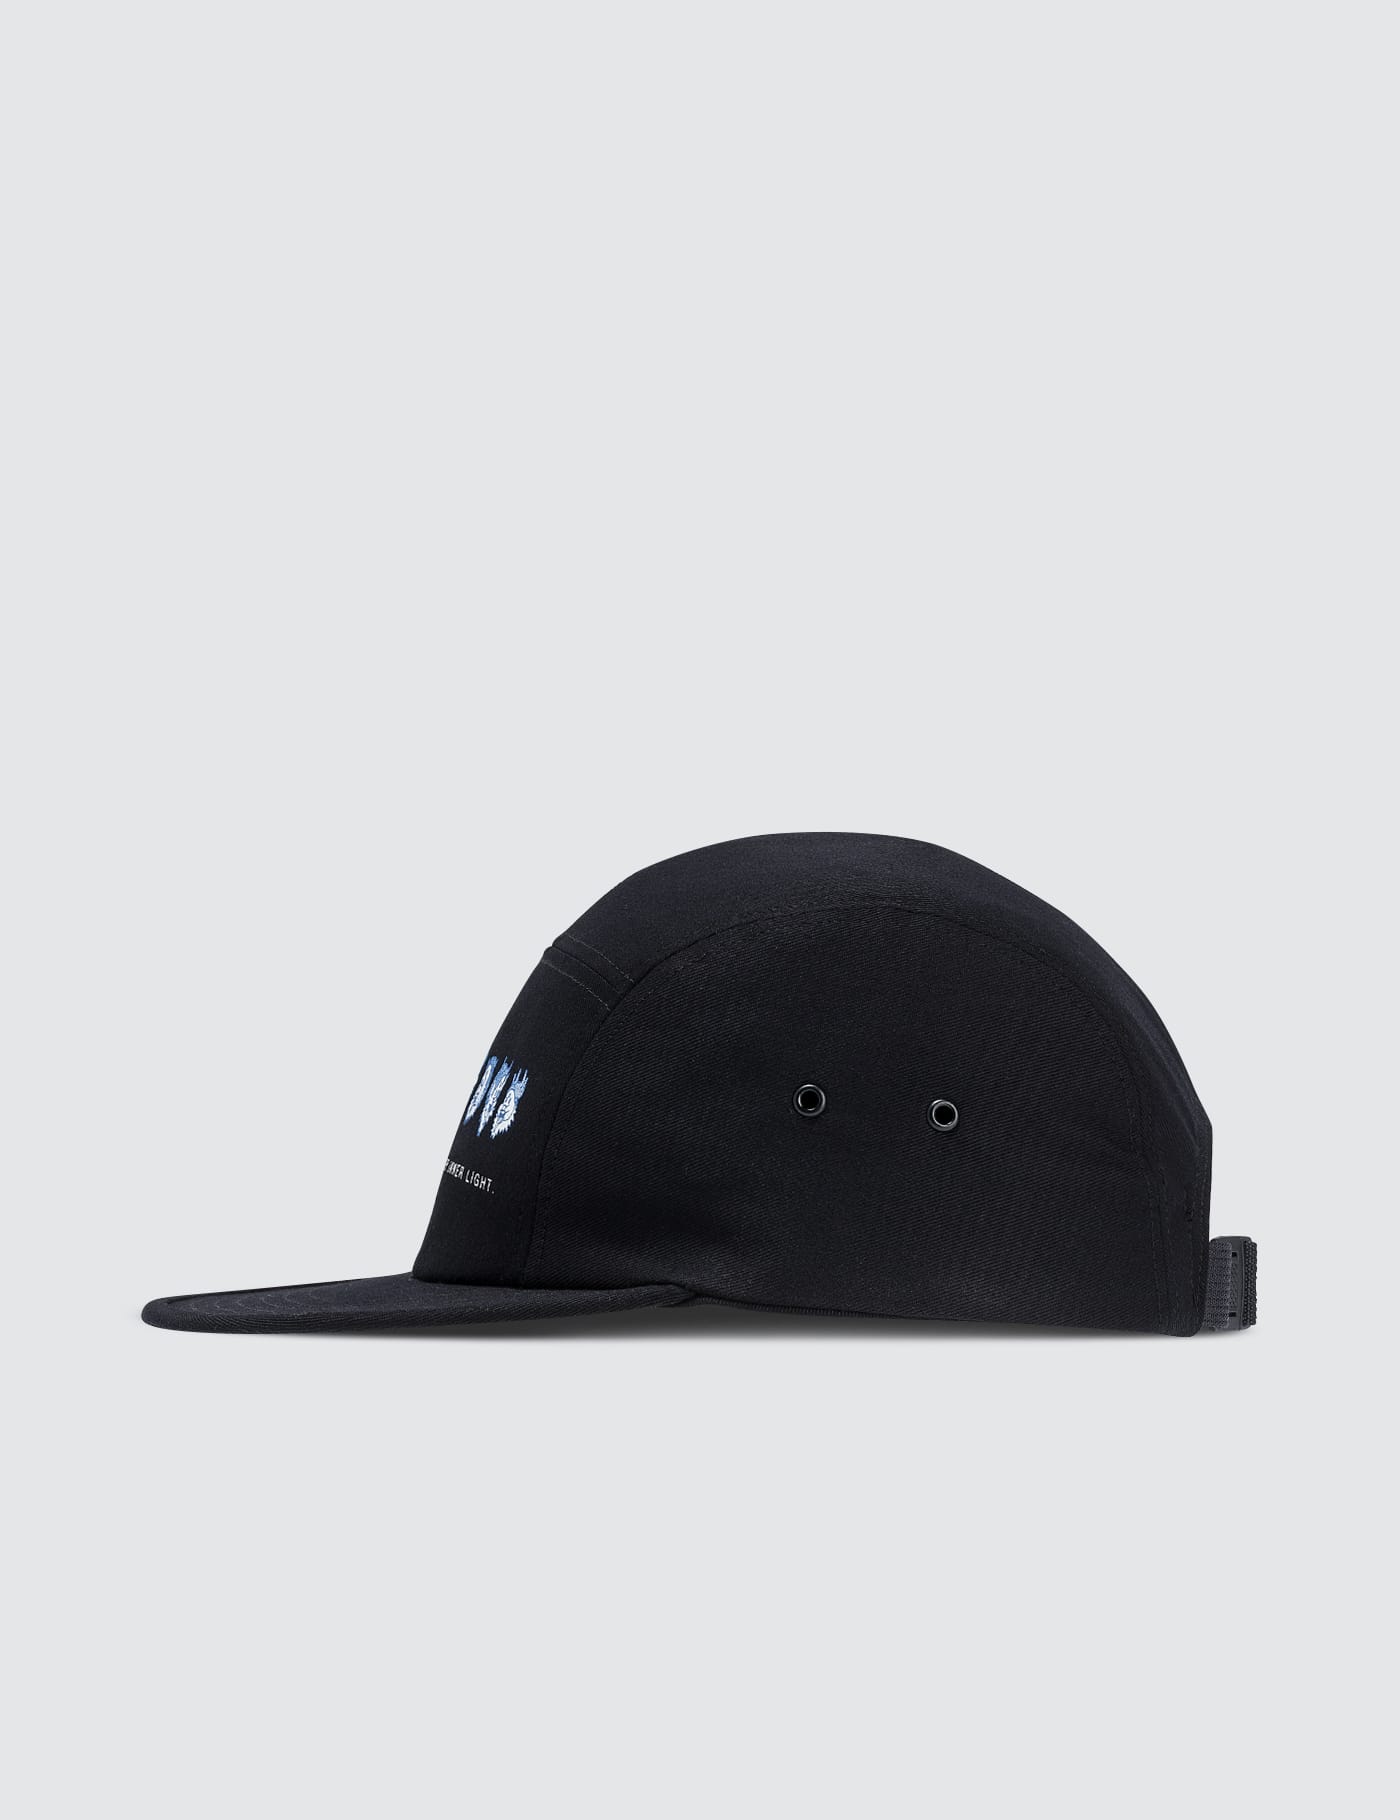 Undercover - Cap | HBX - Globally Curated Fashion and Lifestyle by 